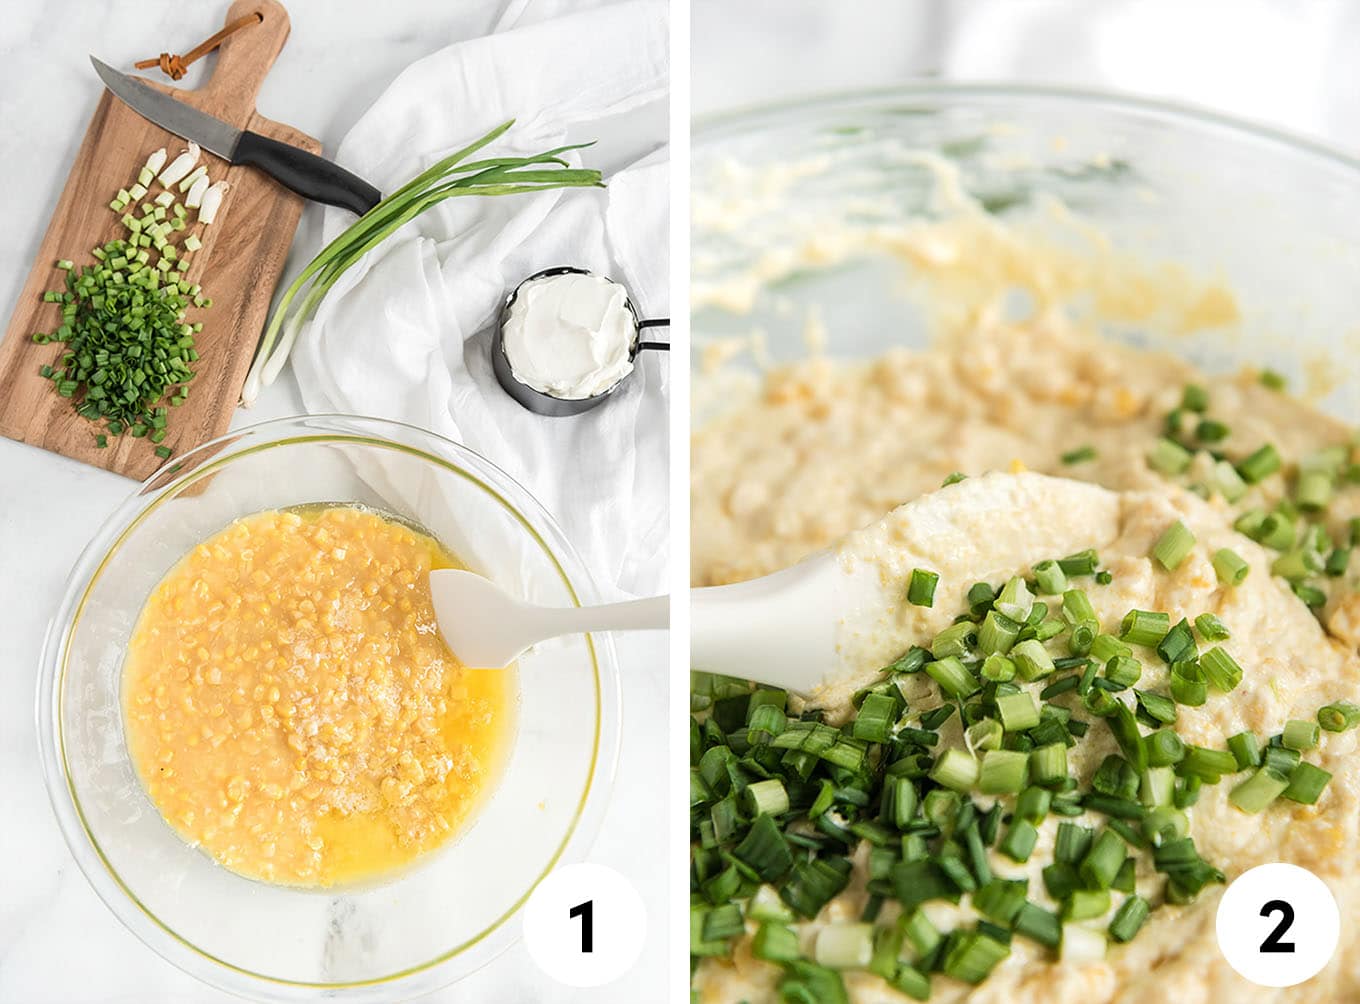 A collage of mixing the ingredients in a bowl and then adding the green onions.